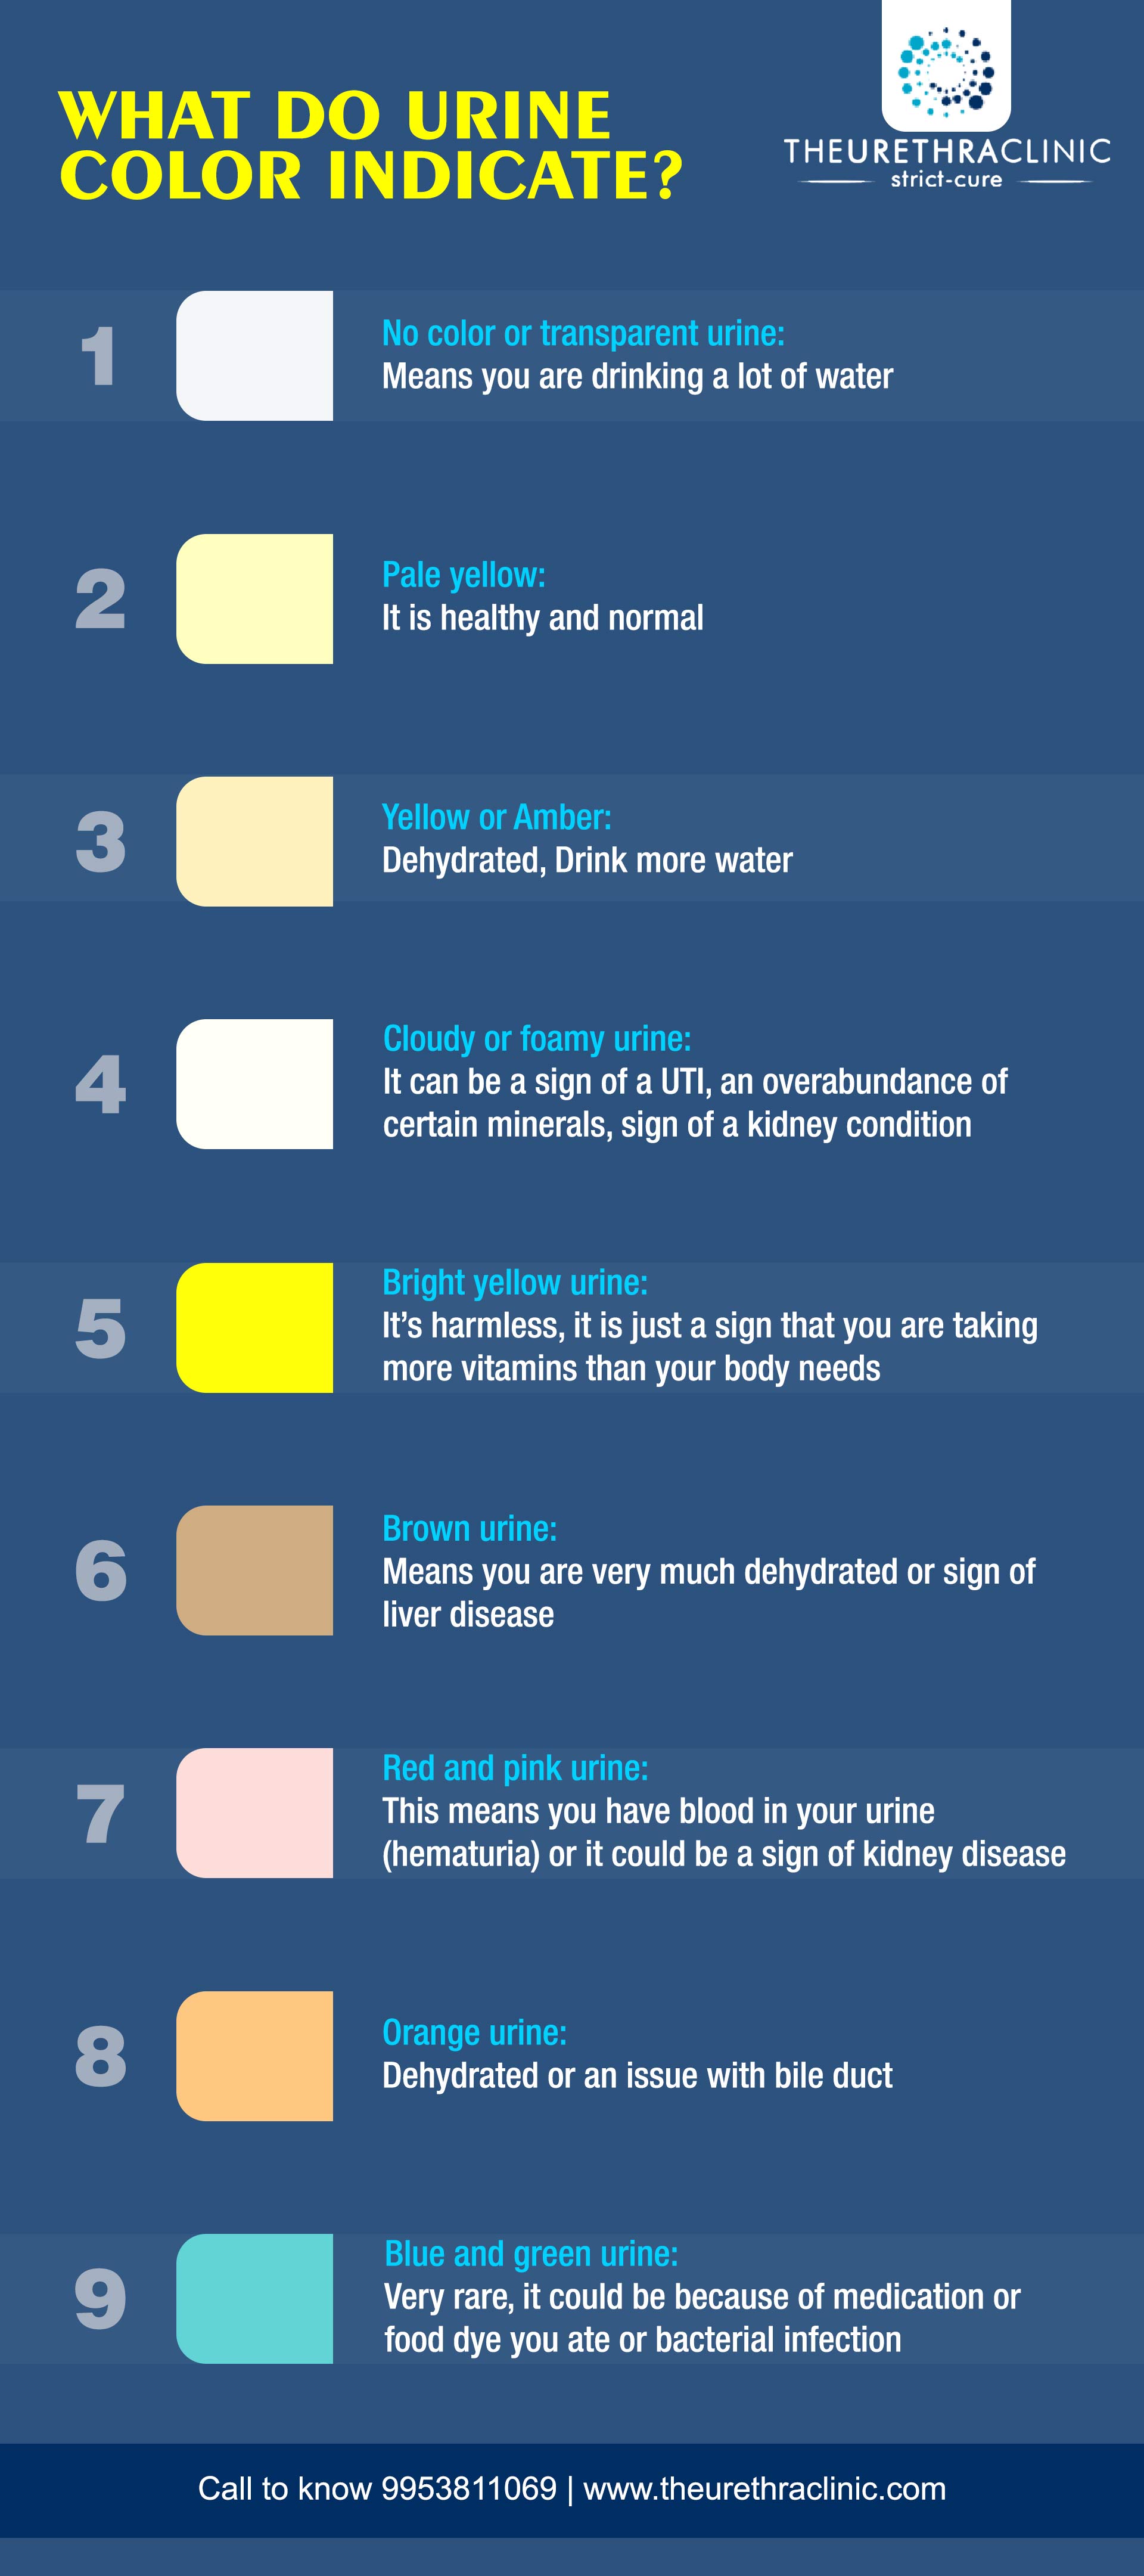 What do your Urine Color Indicates